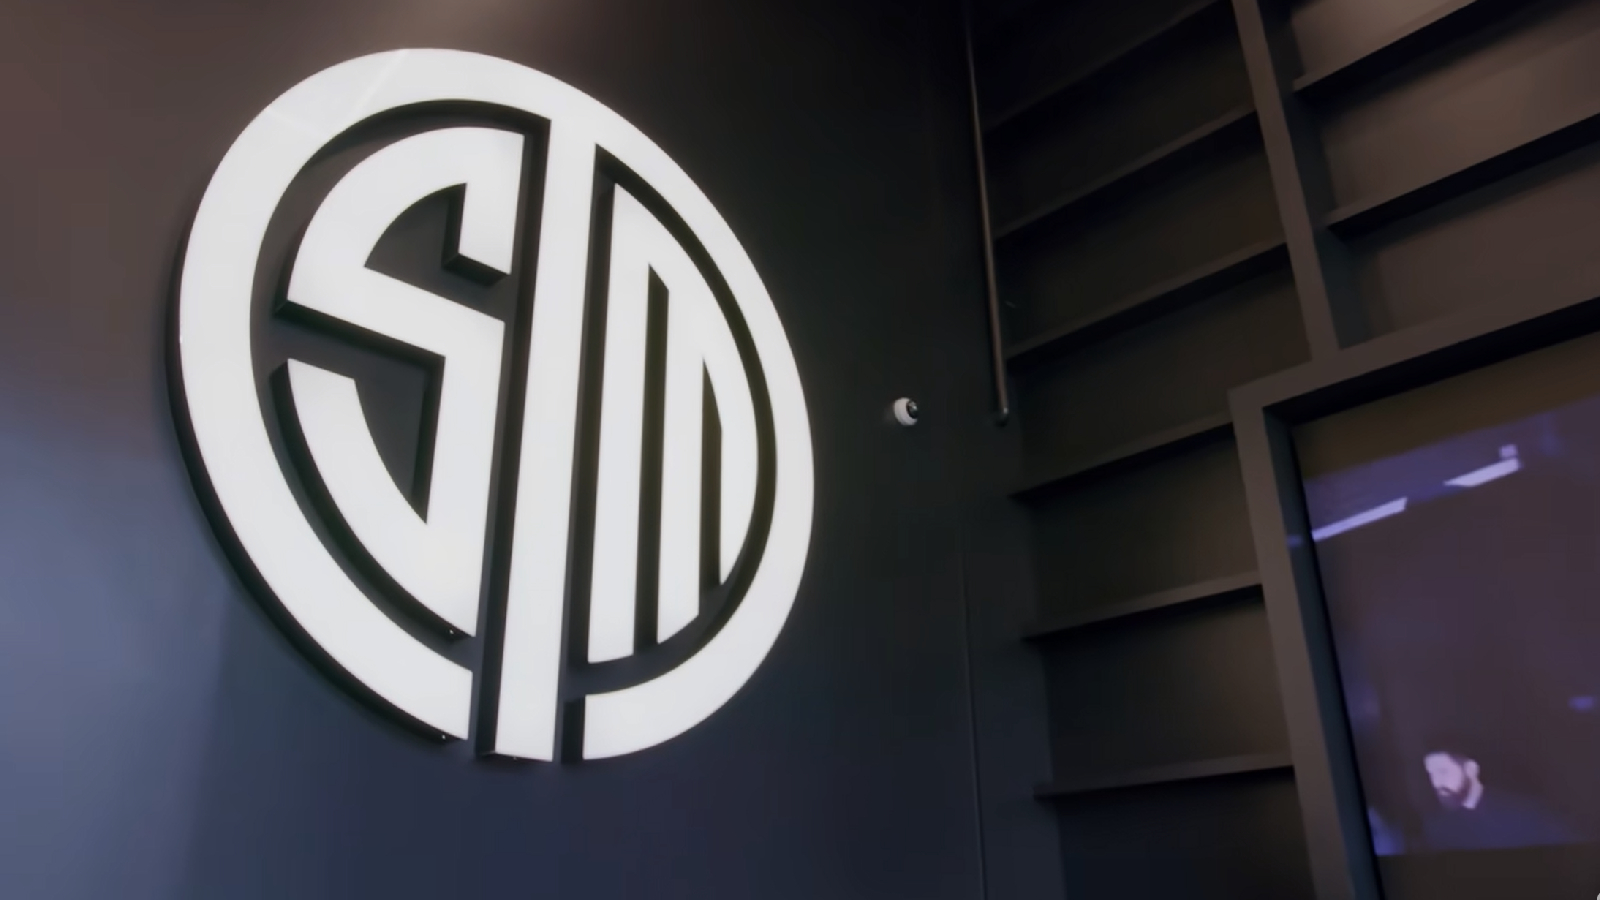 TSM exodus continues as two LCS staff members leave company – Egaxo